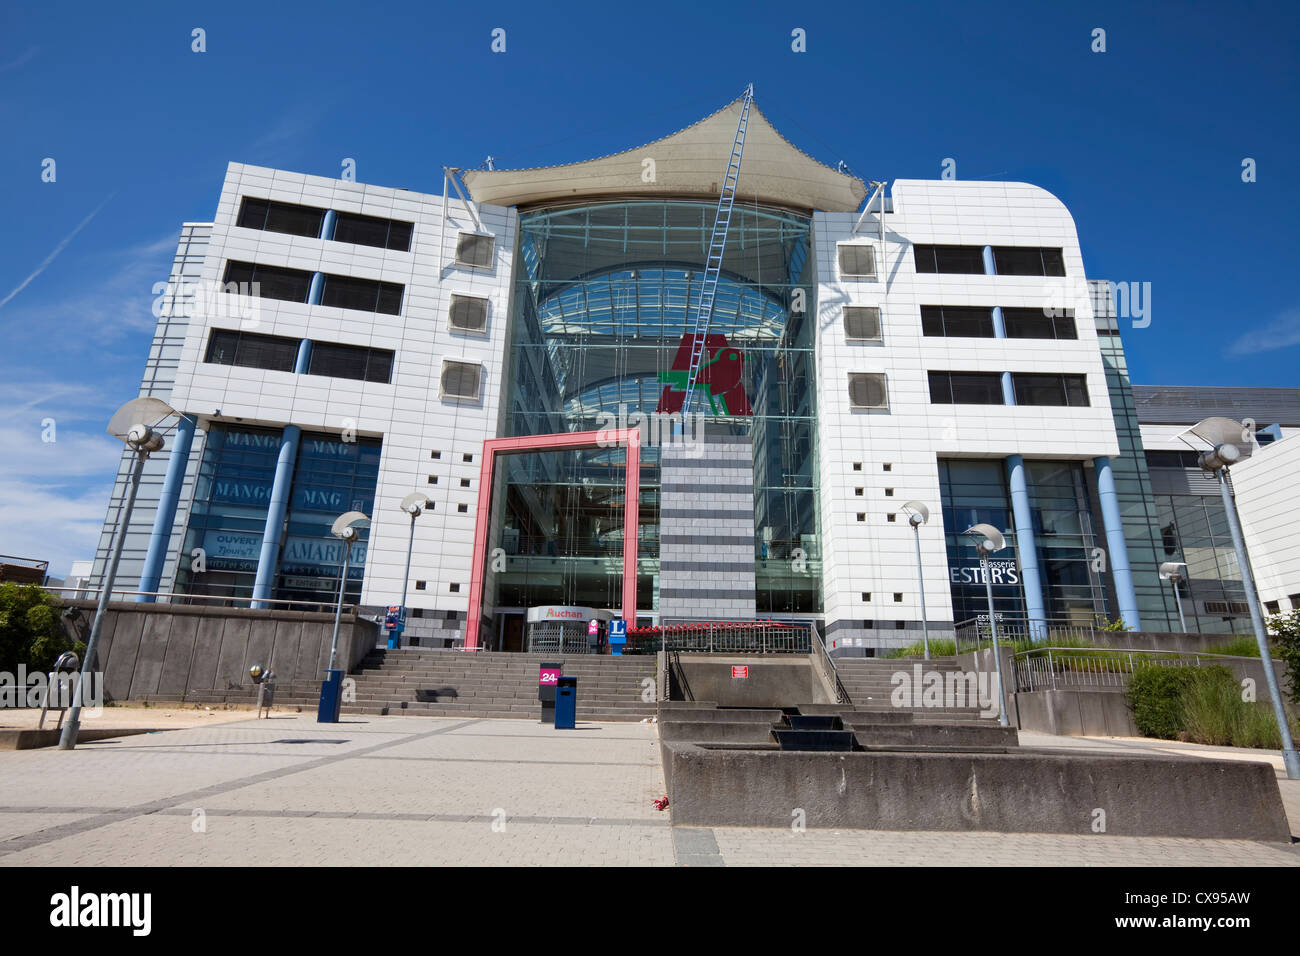 Luxembourg Shopping Banque d'image et photos - Alamy